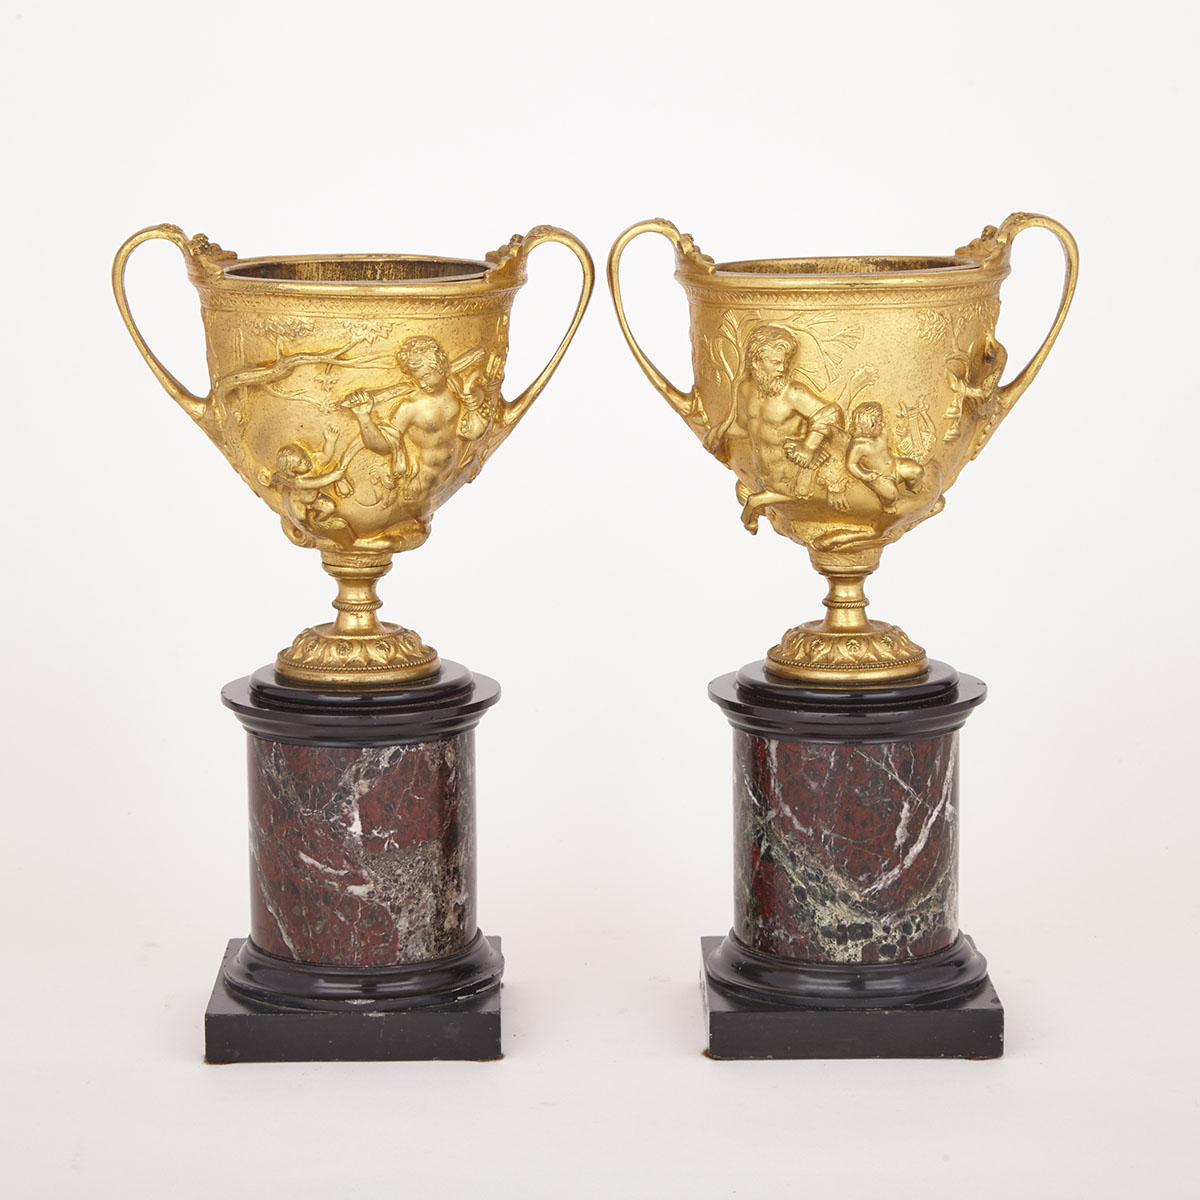 Pair of French Neoclassical Gilt Bronze Mantle Urns, 19th century